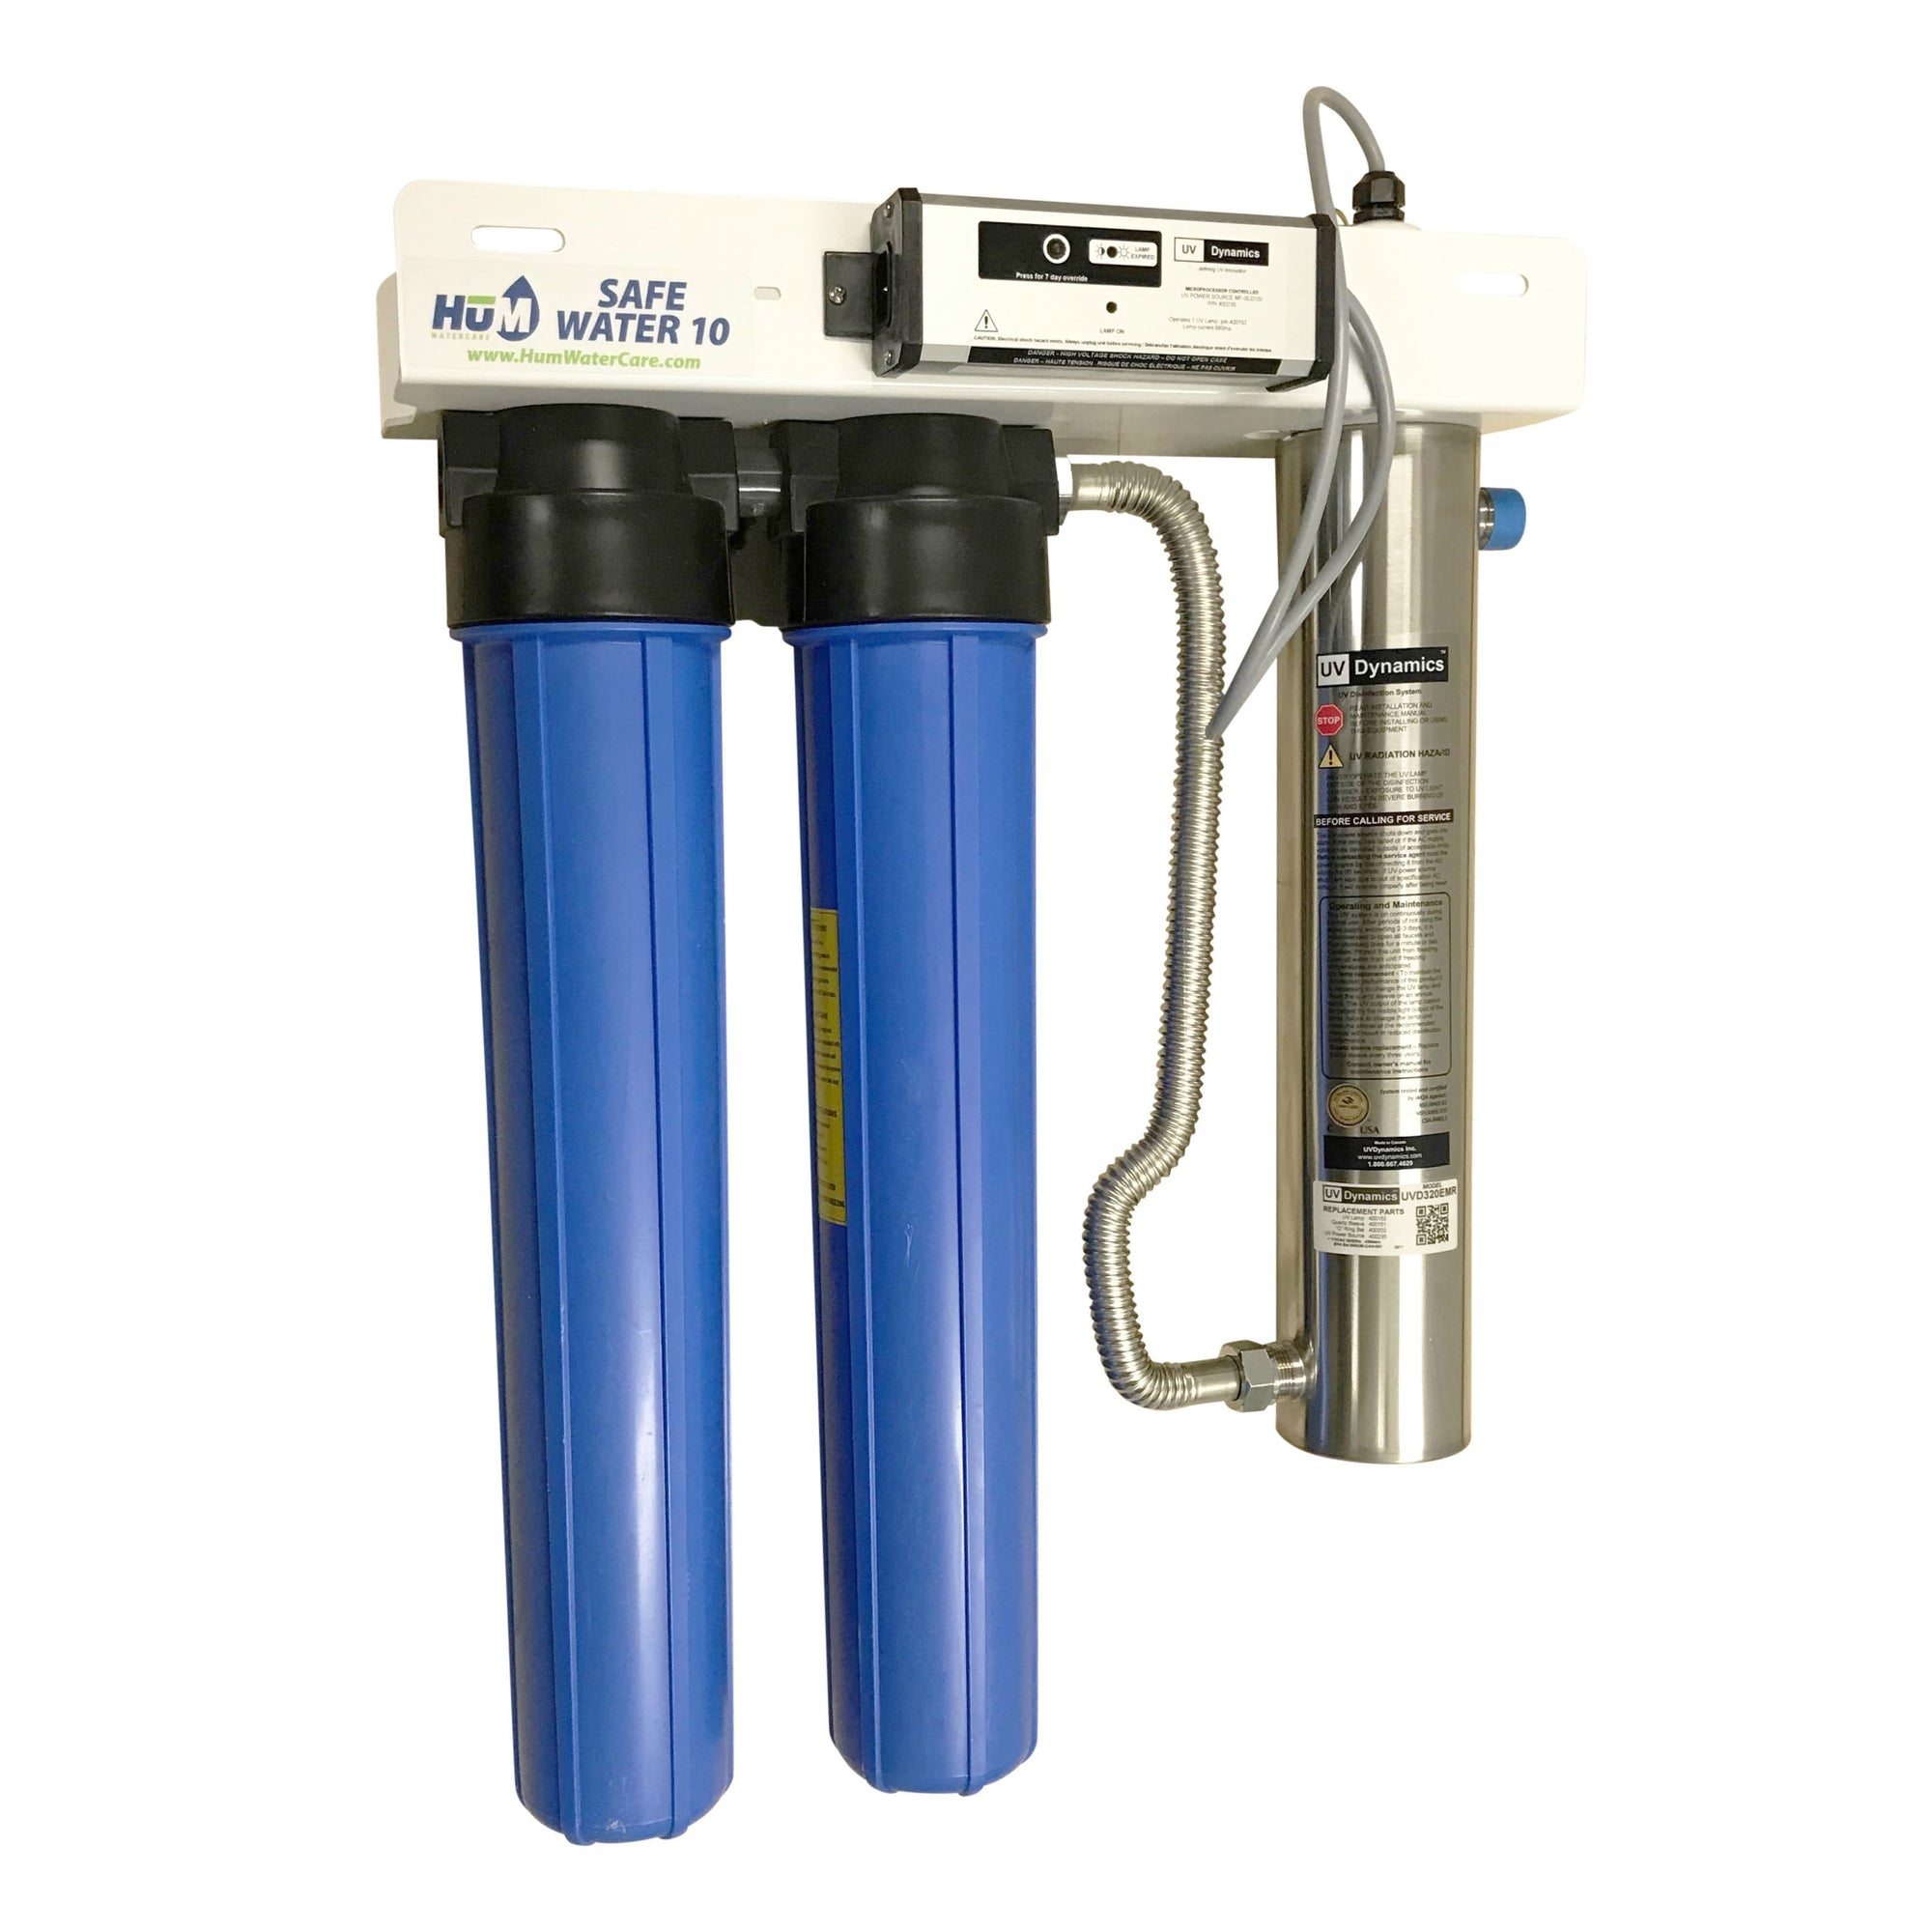 How to Winterize Your Ultraviolet or UV Water Disinfection System